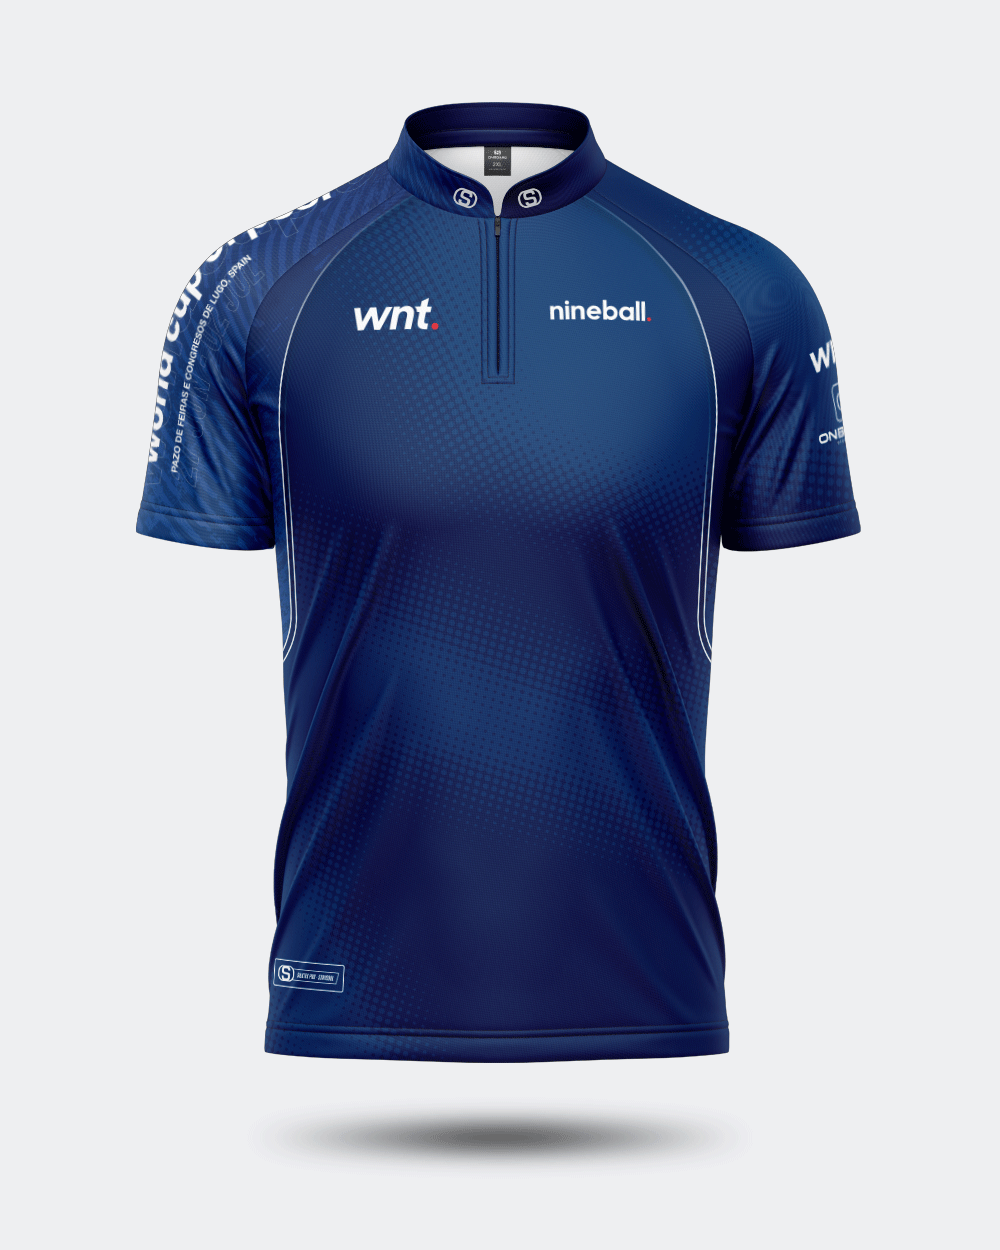 2023 WCOP Event Jersey